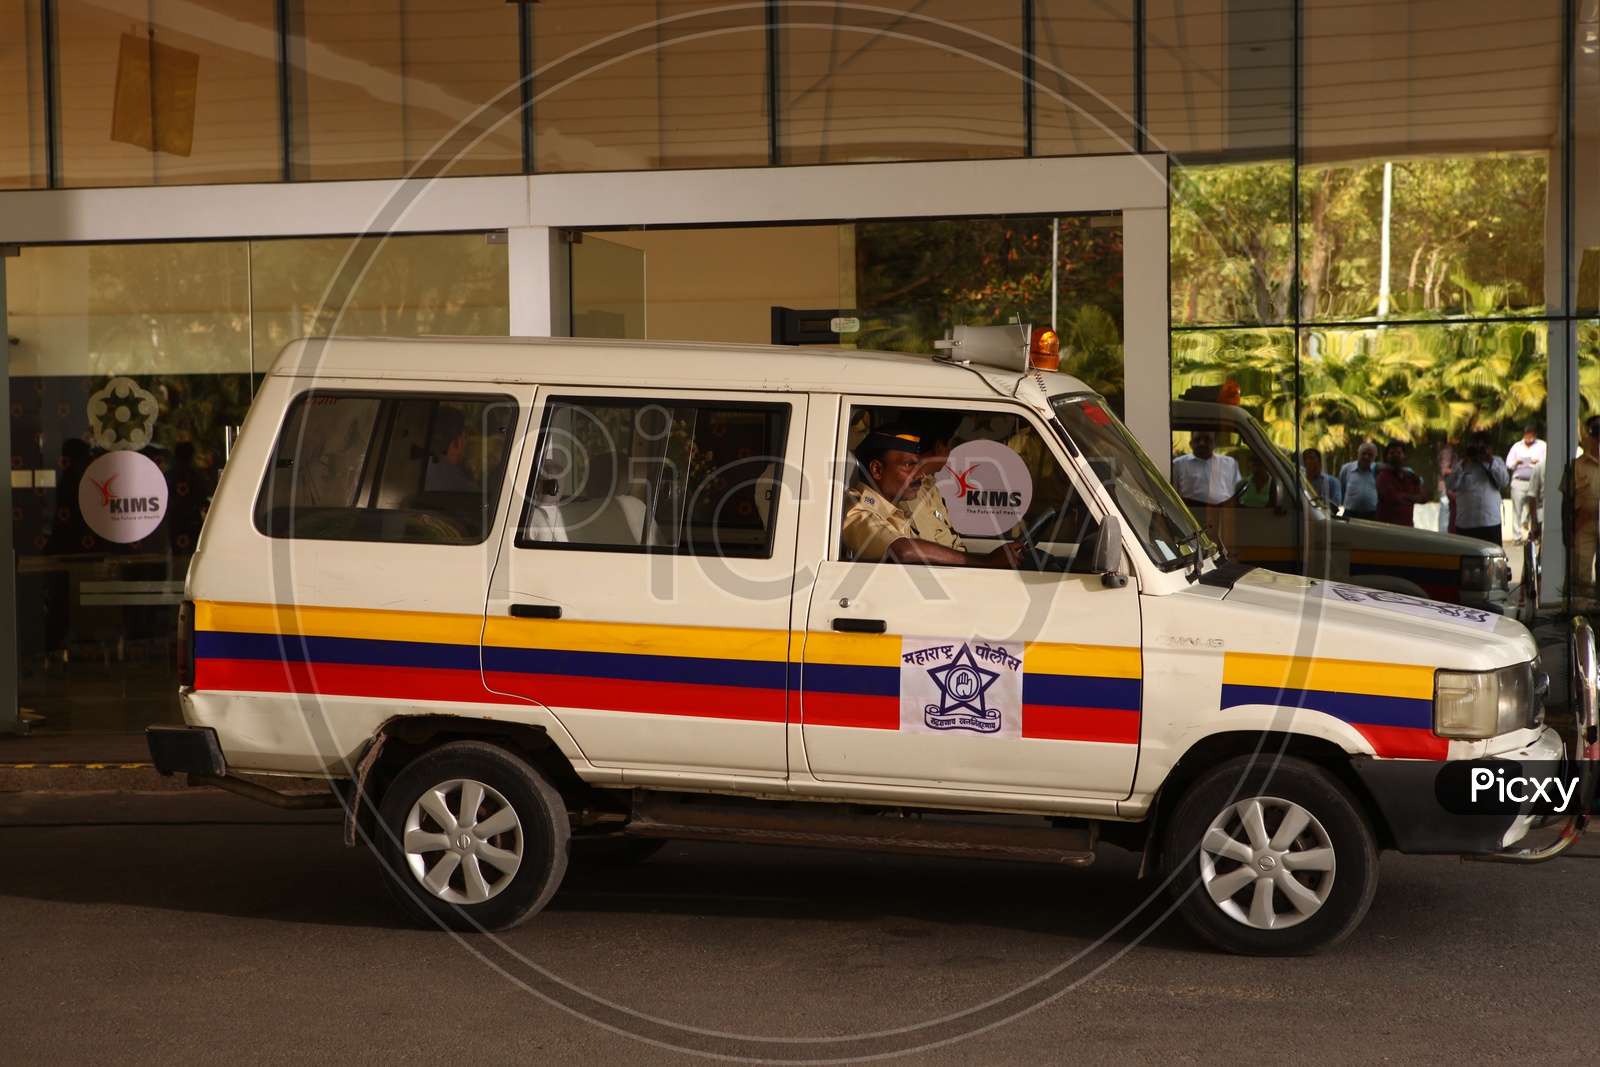 Police Vehicle at a Hospital